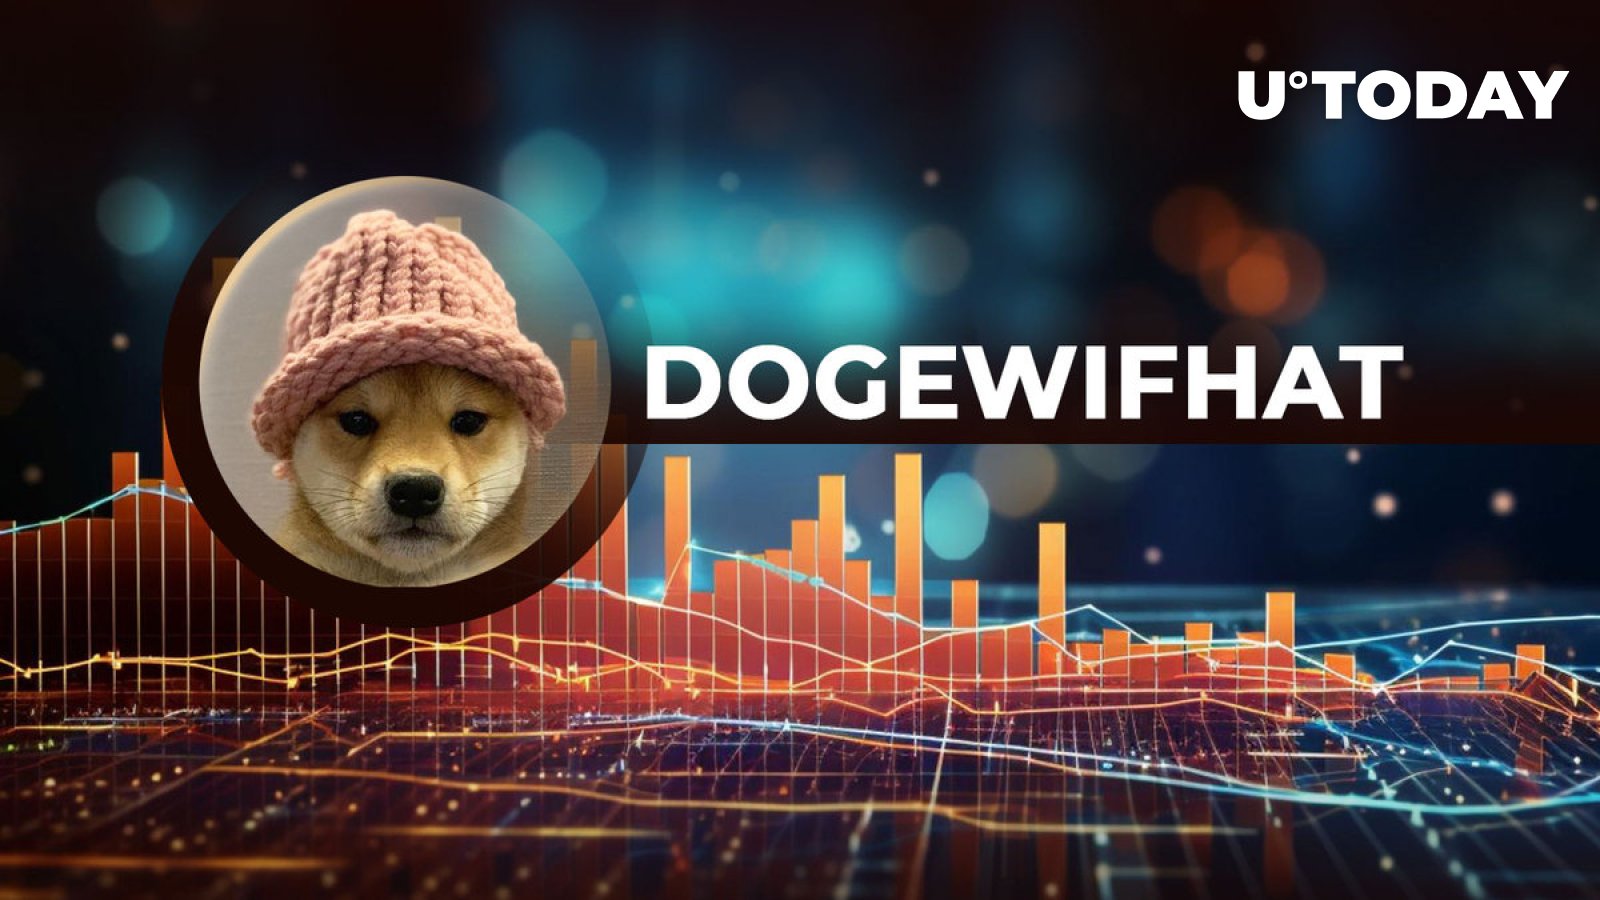 New Solana Meme Coin Dogwifhat Scores Listing on Award-Winning Exchange: Here’s WIF Price Reaction